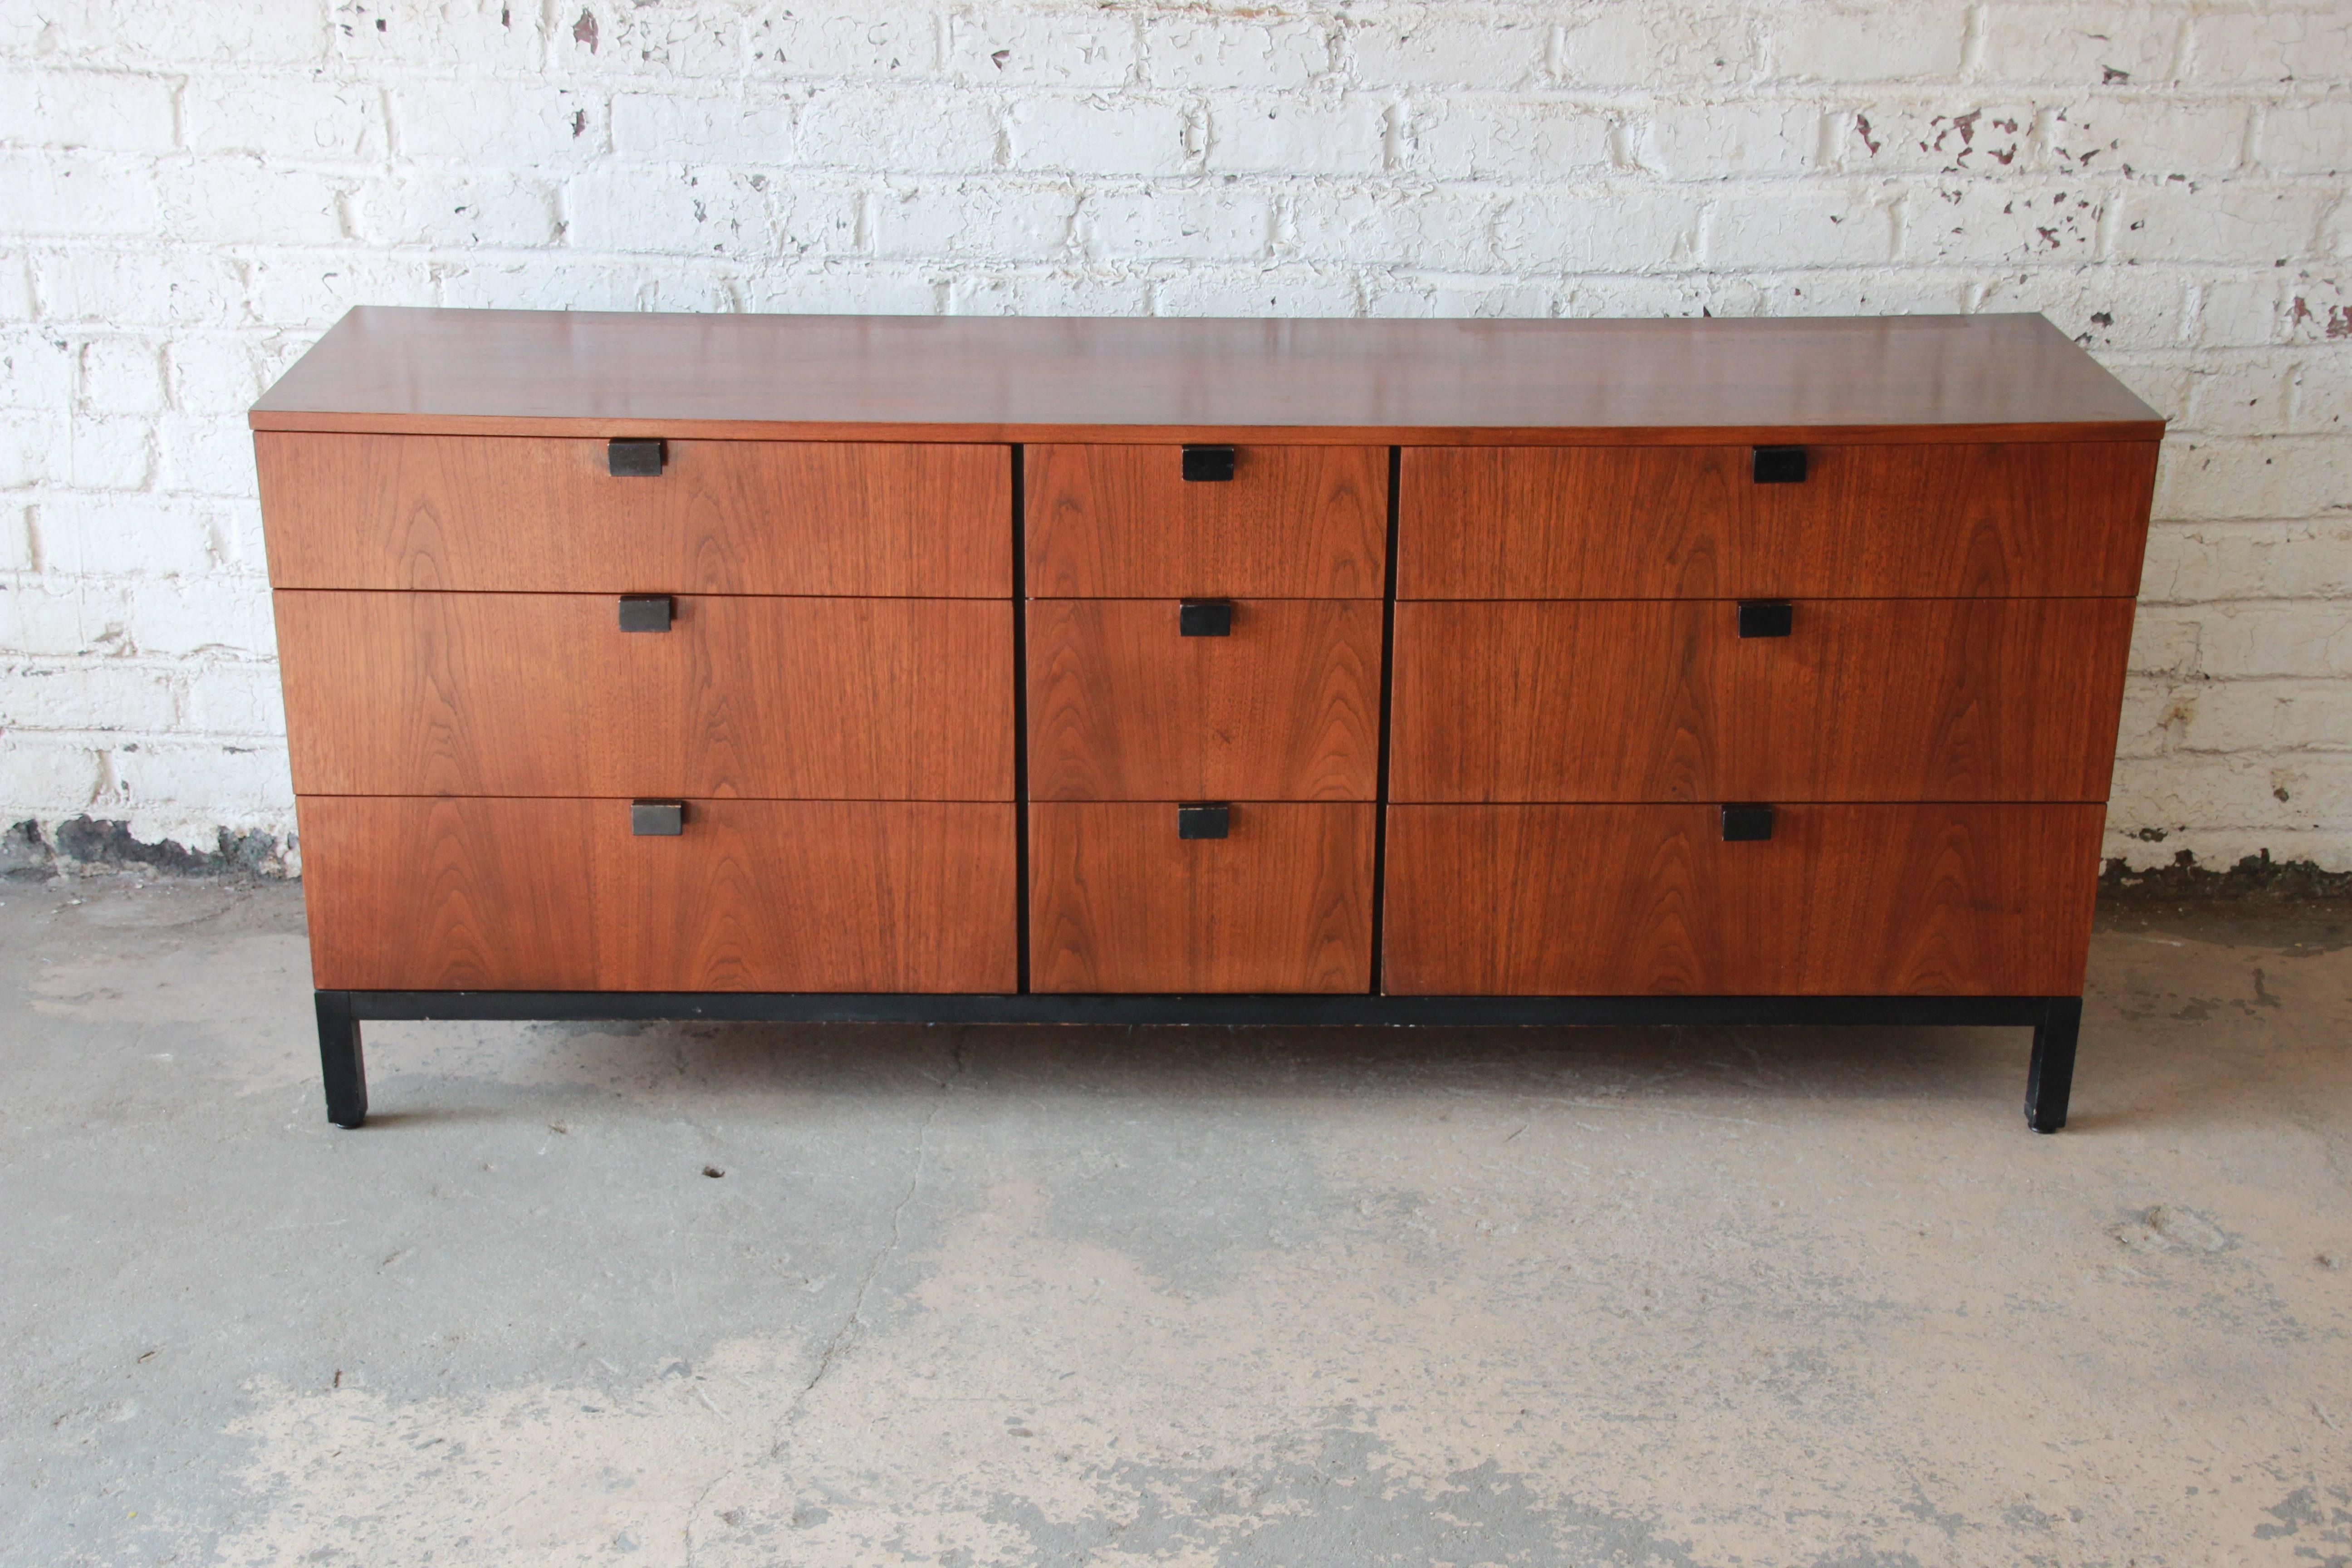 Offering a stunning Mid-Century Modern walnut nine-drawer dresser designed by Milo Baughman for Directional, circa 1960s. The dresser features gorgeous book-matched walnut wood grain, with sculpted ebonized pulls and an ebonized base. It offers